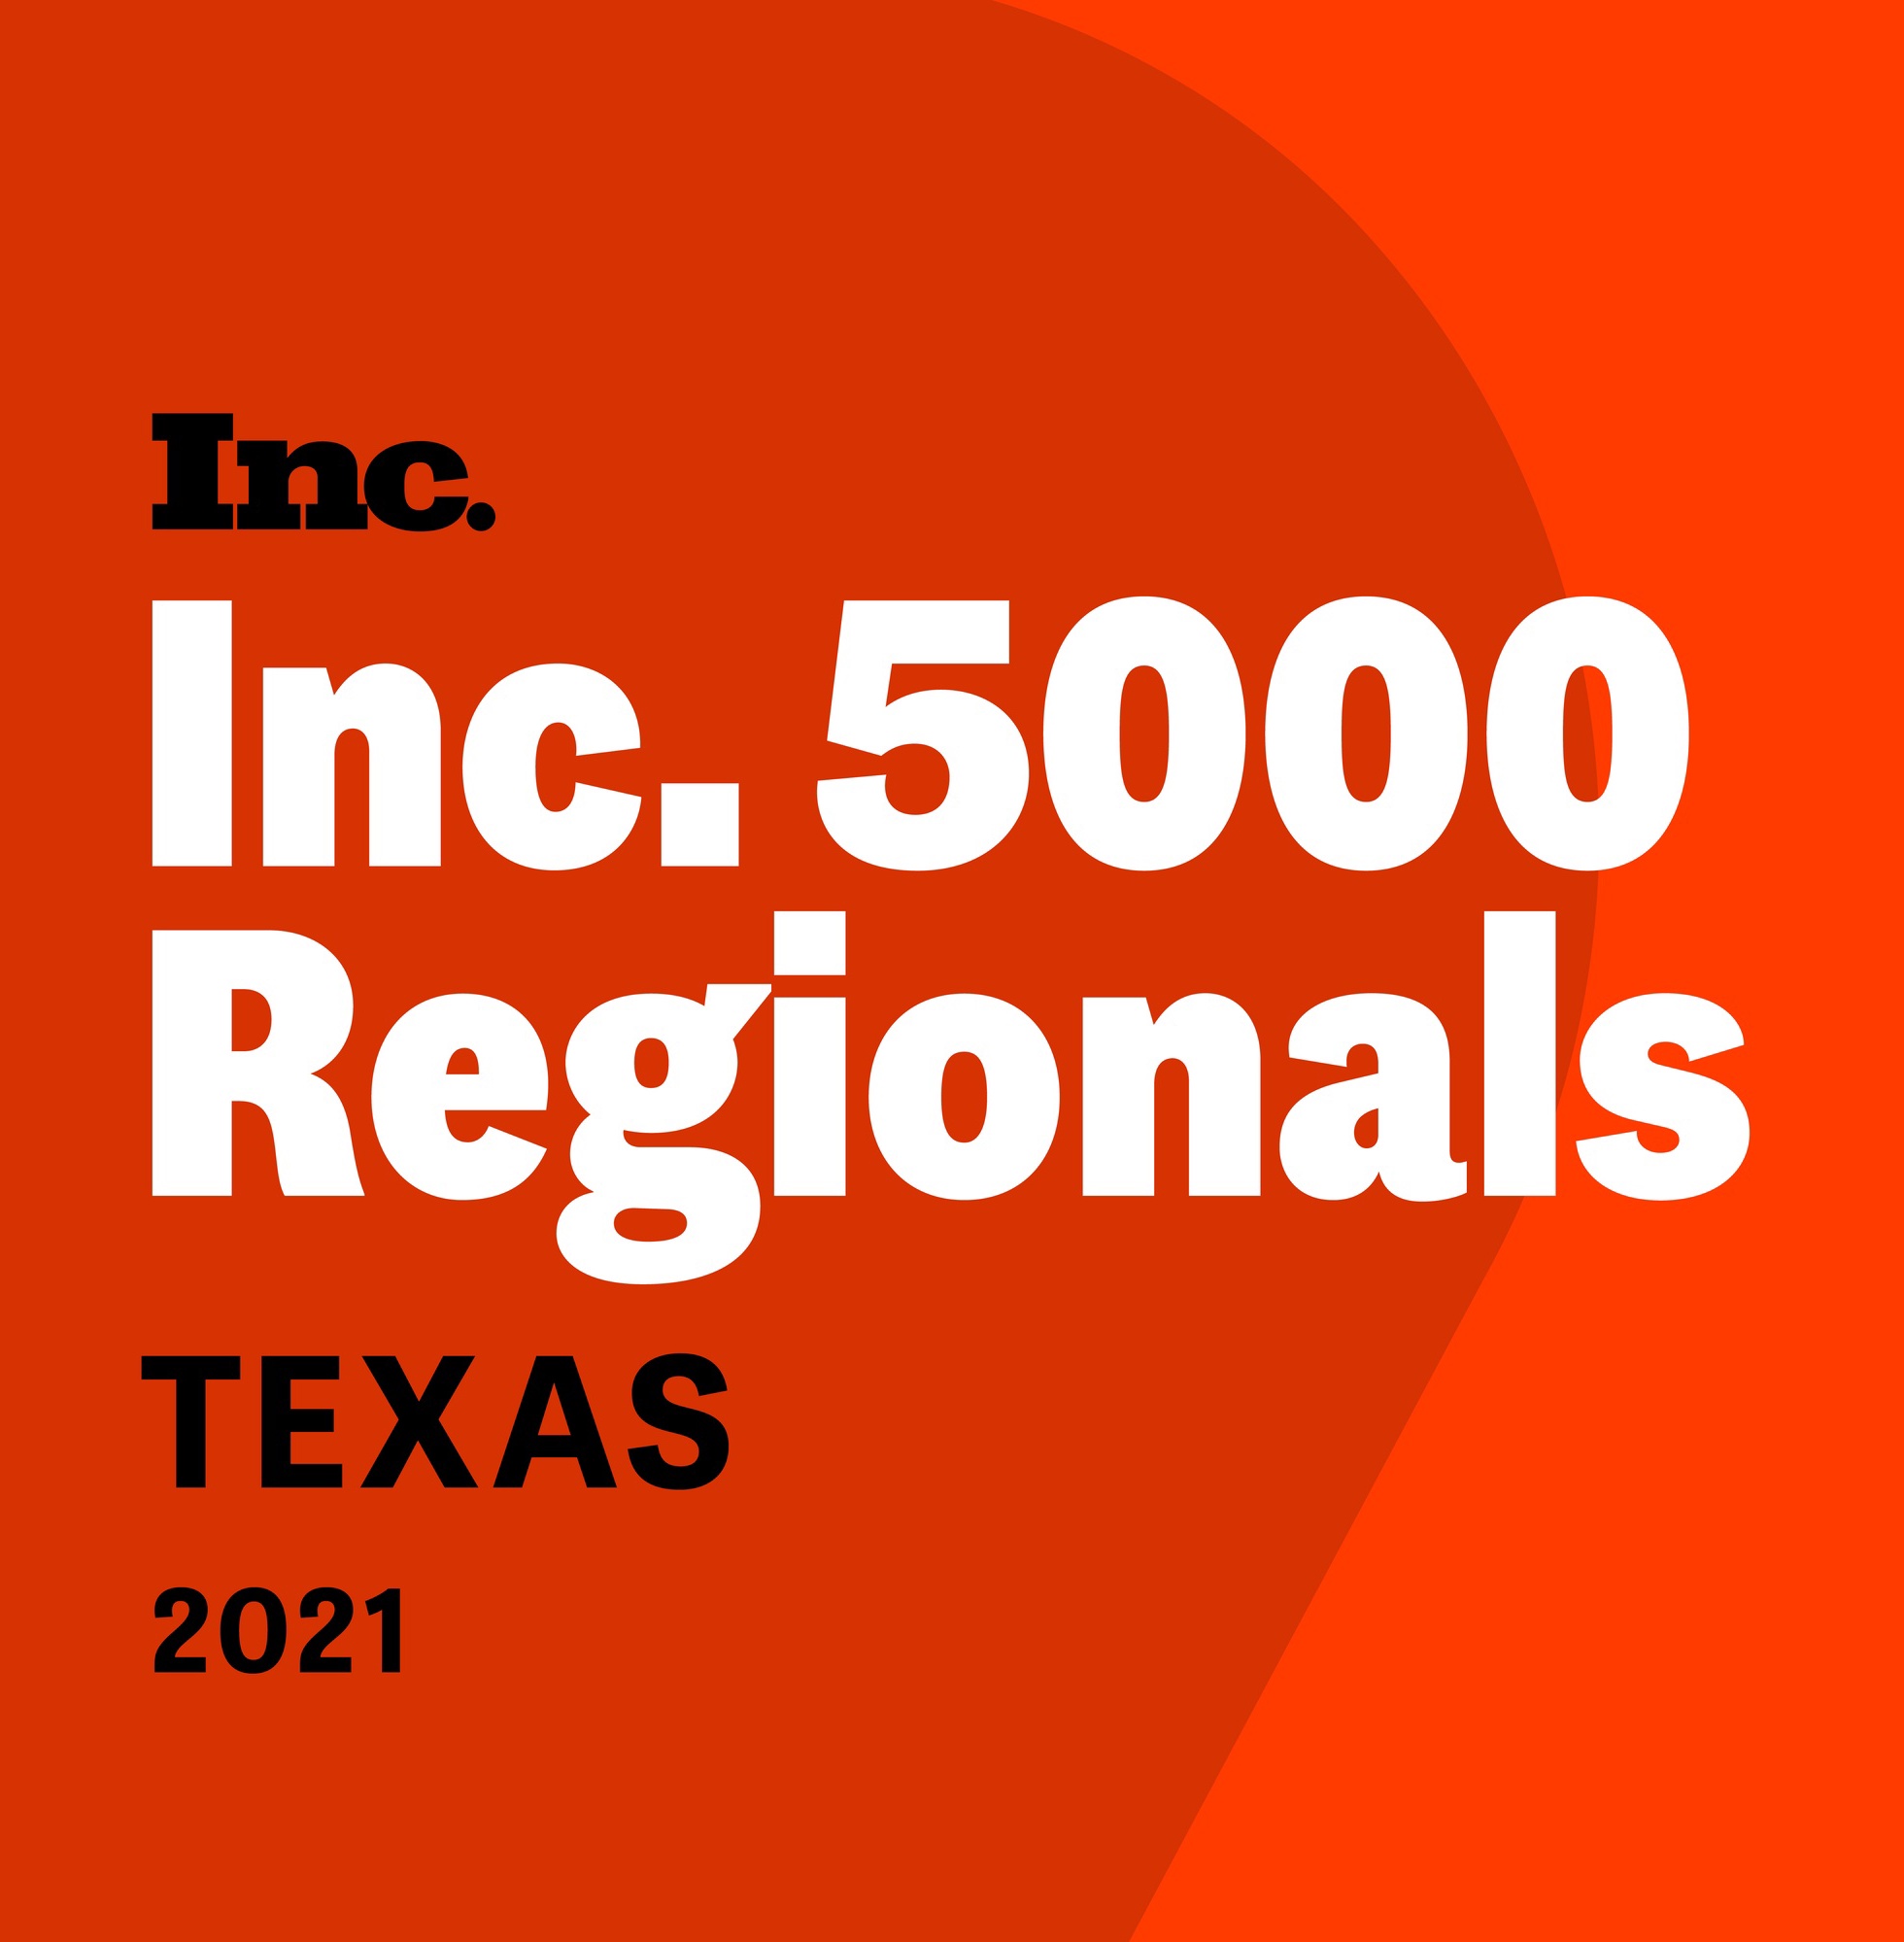 Endiem is one of Inc. Magazine’s Fastest-Growing Private Companies in Texas!